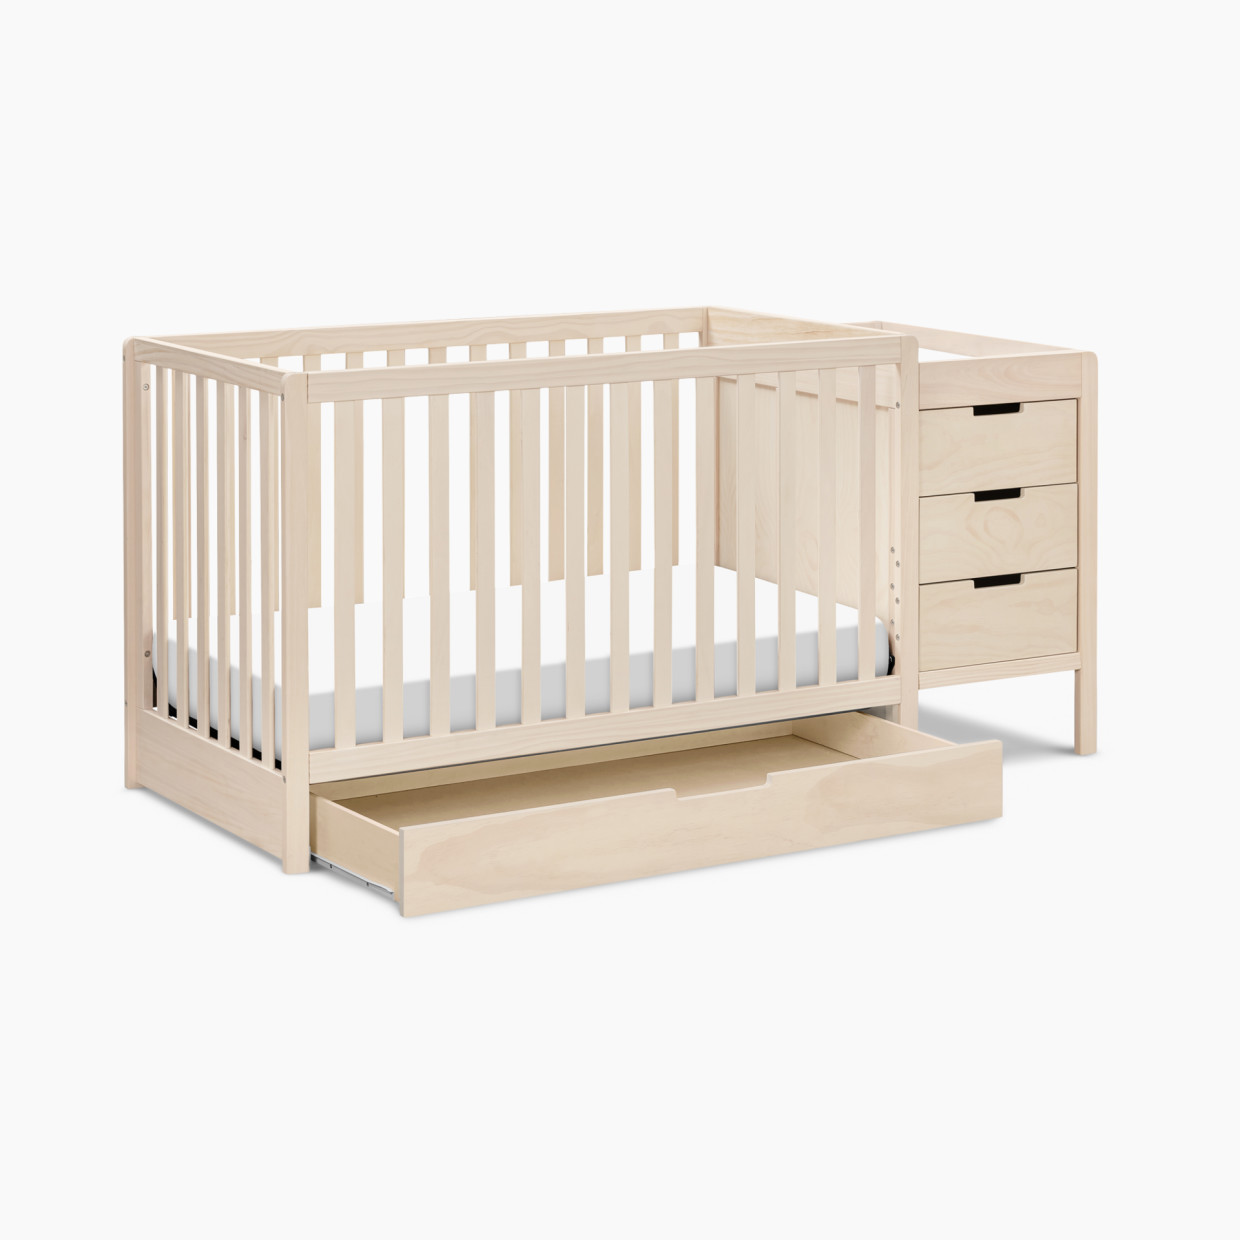 Carter's by DaVinci Colby 4-in-1 Convertible Crib & Changer Combo - Washed Natural.